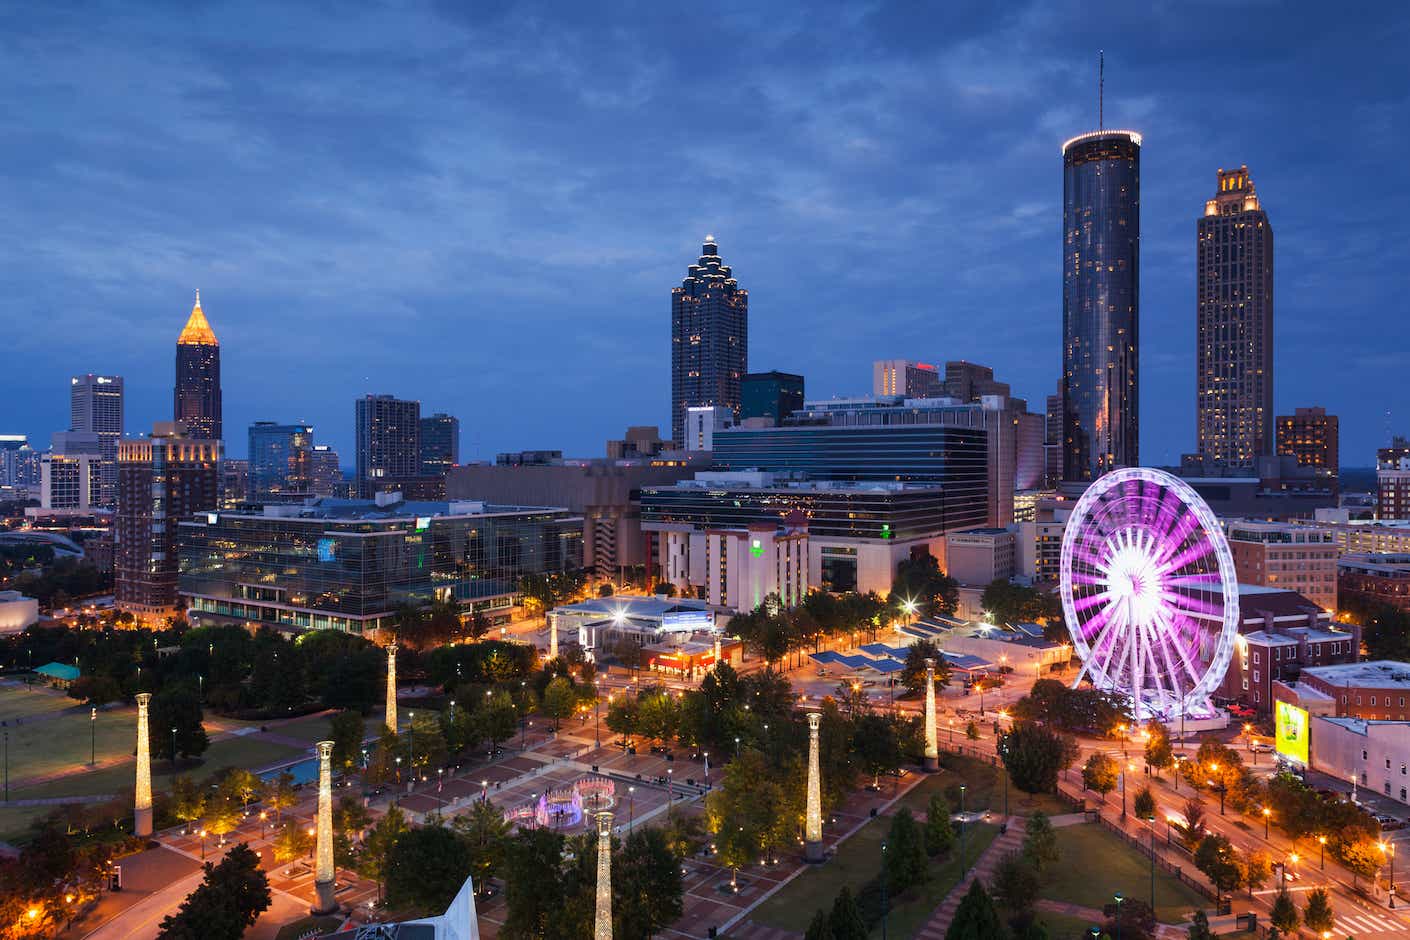 An elevated city view of Atlanta with a lit-up ferris wheel at dusk.